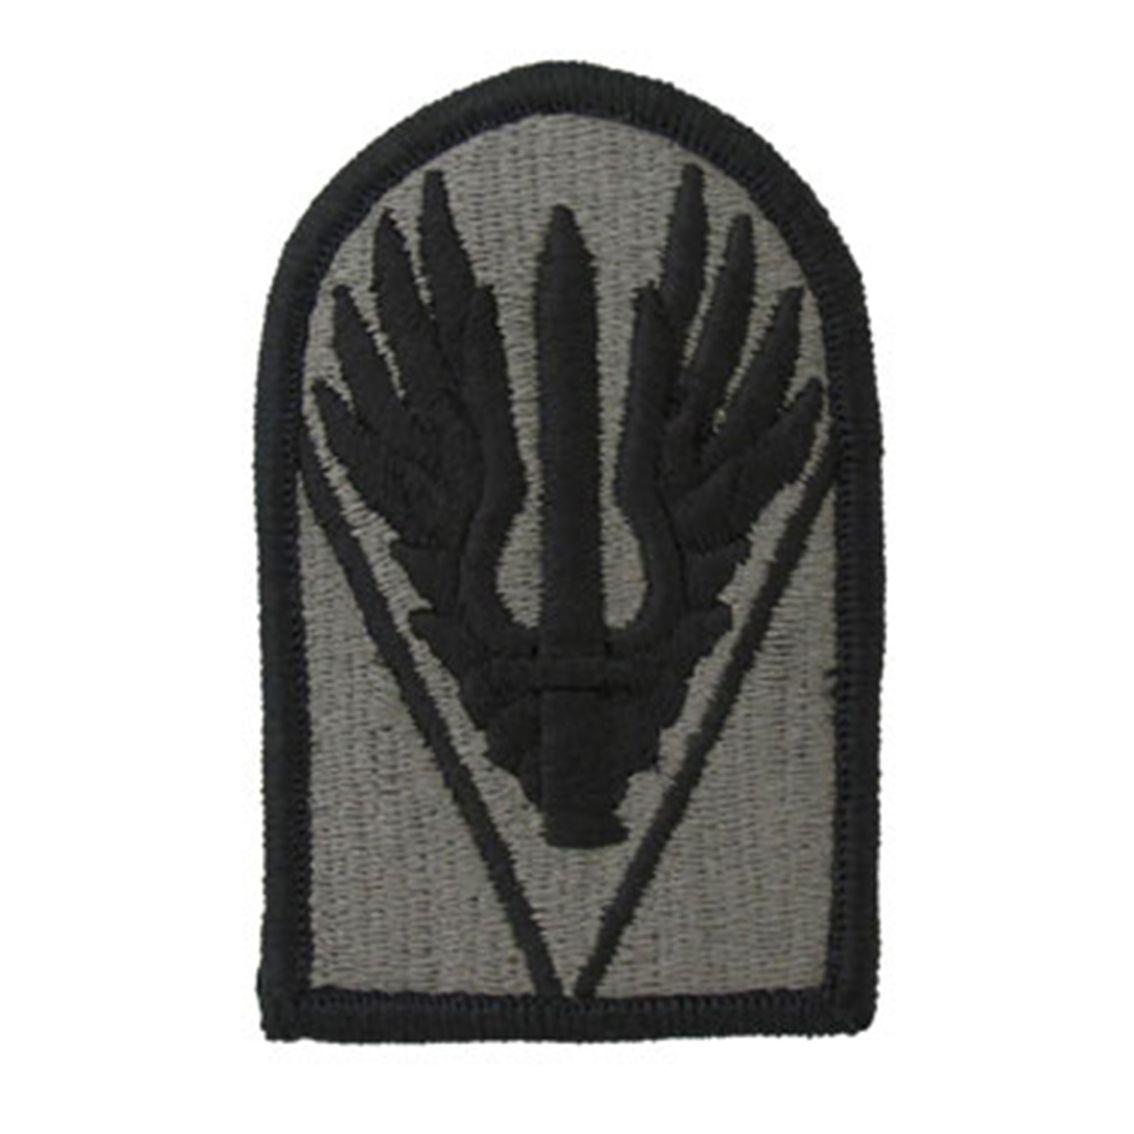 JRTC Logo - Army Unit Patch Joint Readiness Training Center (jrtc) | 1st Unit ...